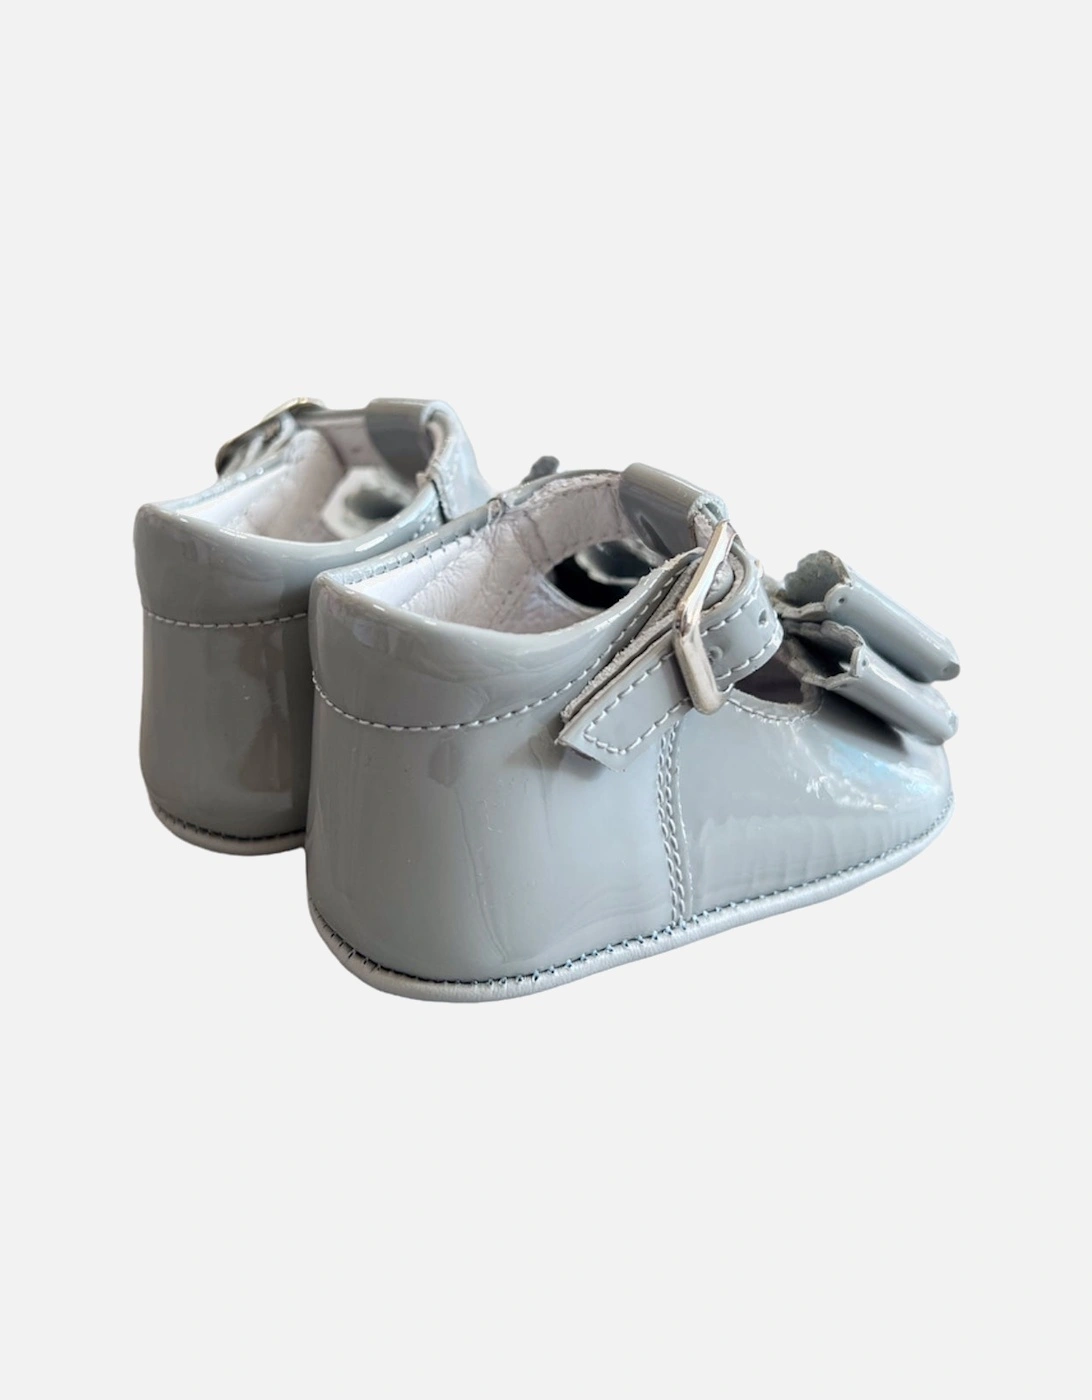 Grey Bow Patent Leather Pre Walkers